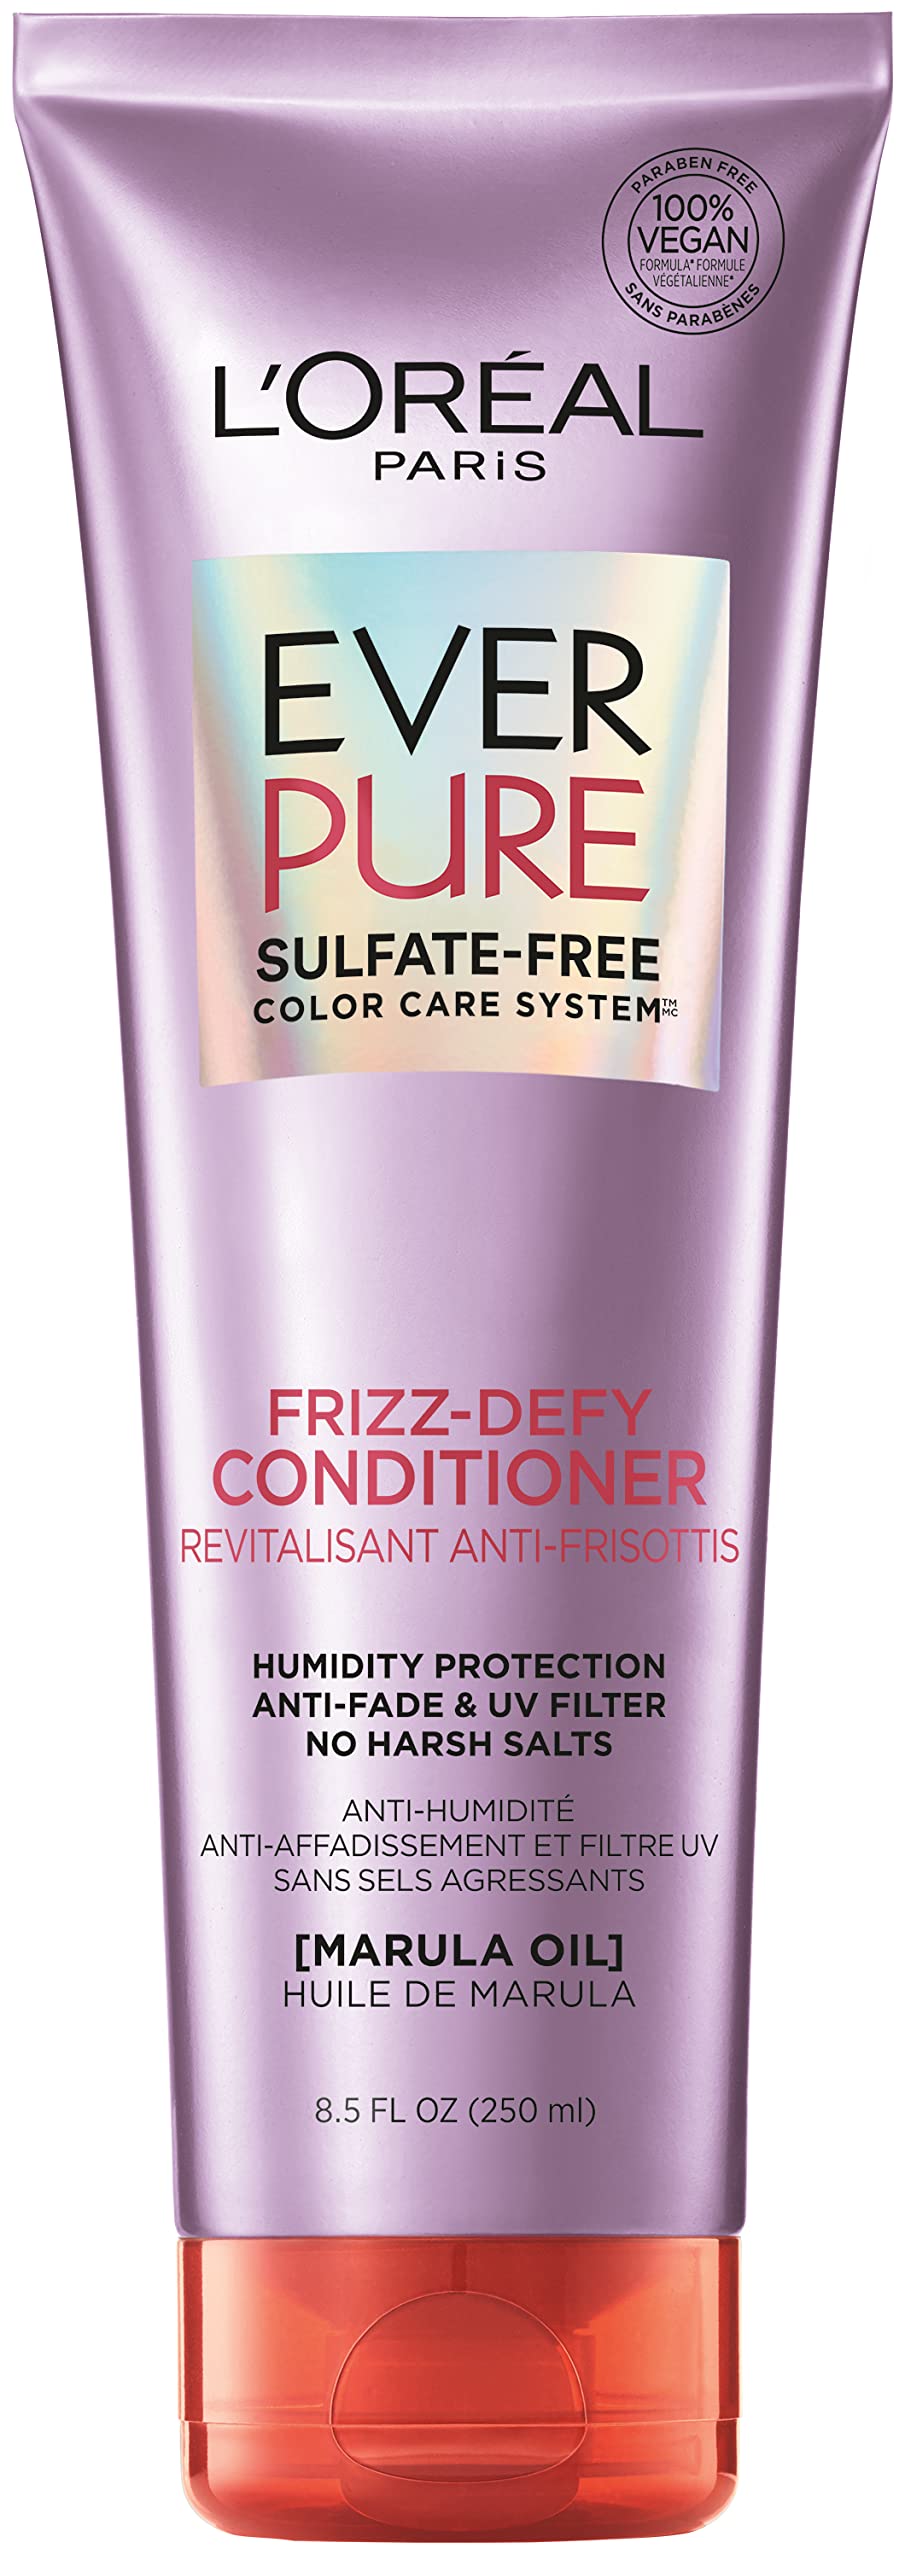 L'Oreal Paris EverPure Sulfate Free Frizz-Defy Conditioner, with Marula Oil, 8.5 Fl; Oz (Packaging May Vary)